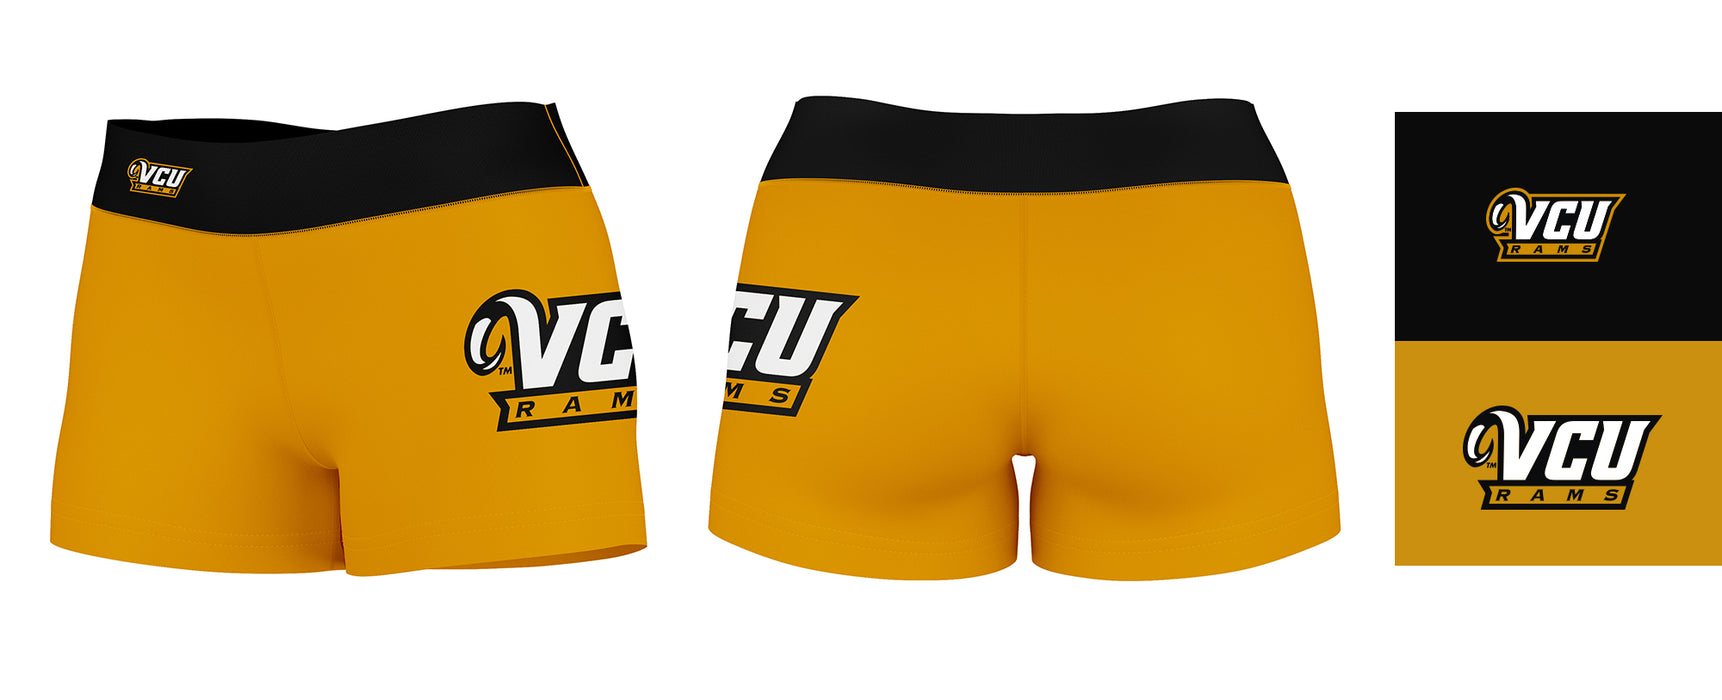 VCU Rams Virginia Commonwealth Logo on Thigh & Waistband Maroon Gold Black Yoga Booty Workout Shorts 3.75 Inseam - Vive La Fête - Online Apparel Store